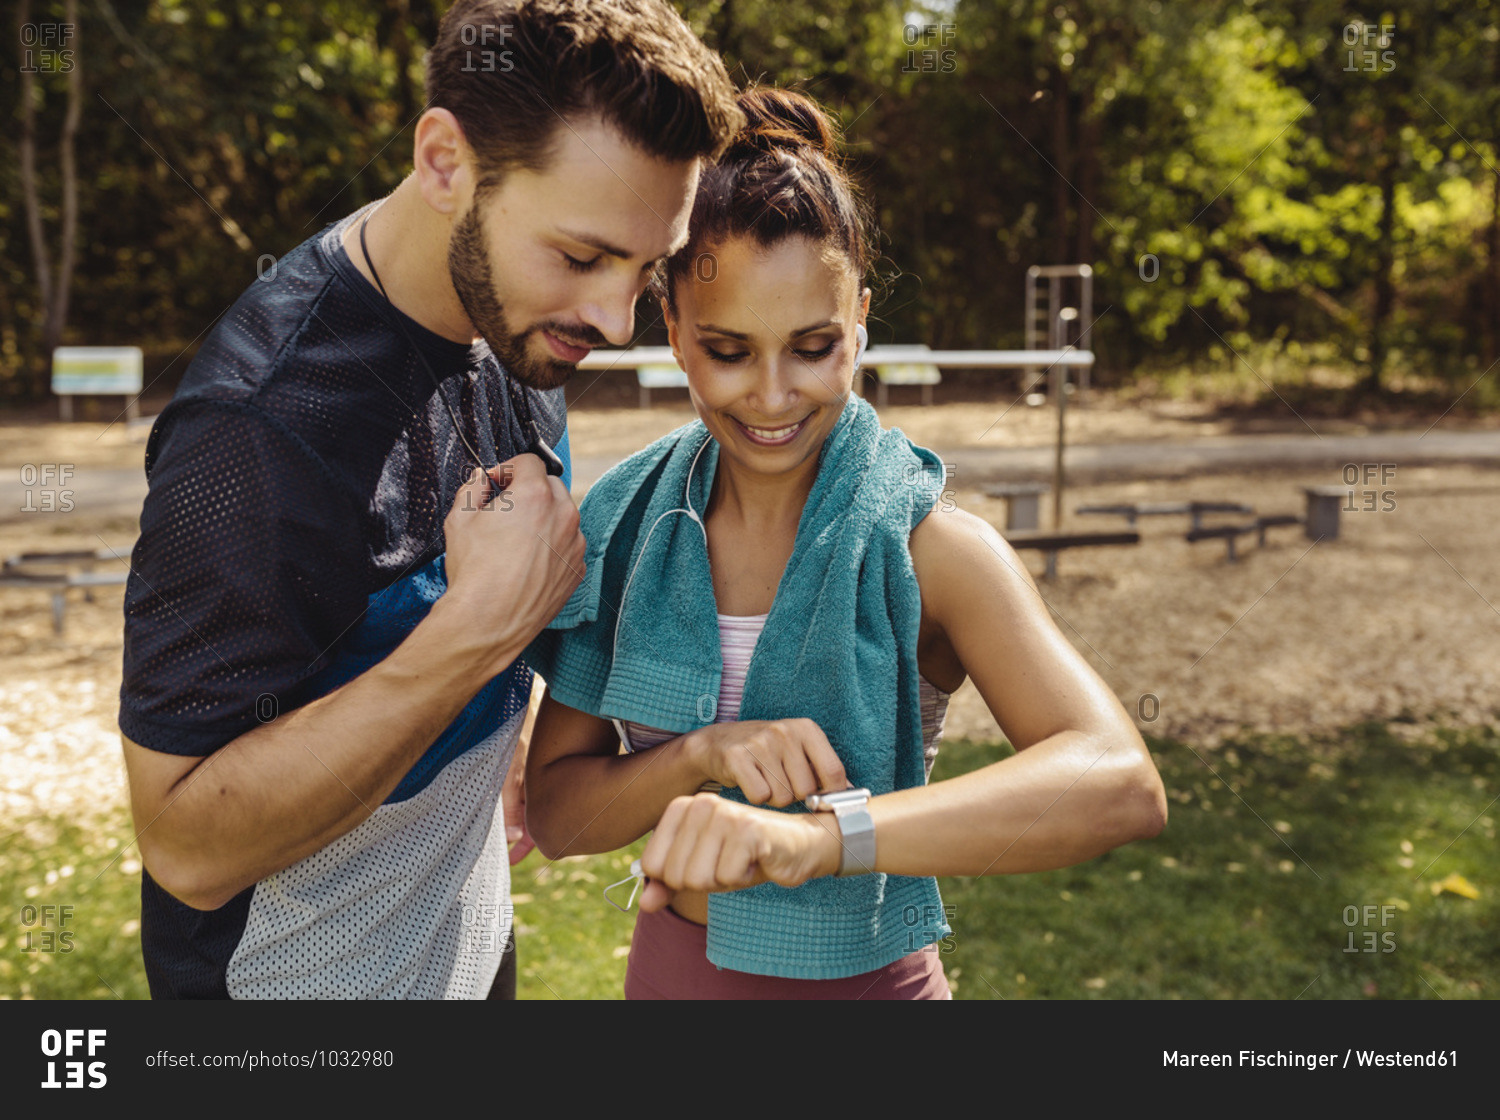 Sporty man and woman looking at a smartwatch in a park